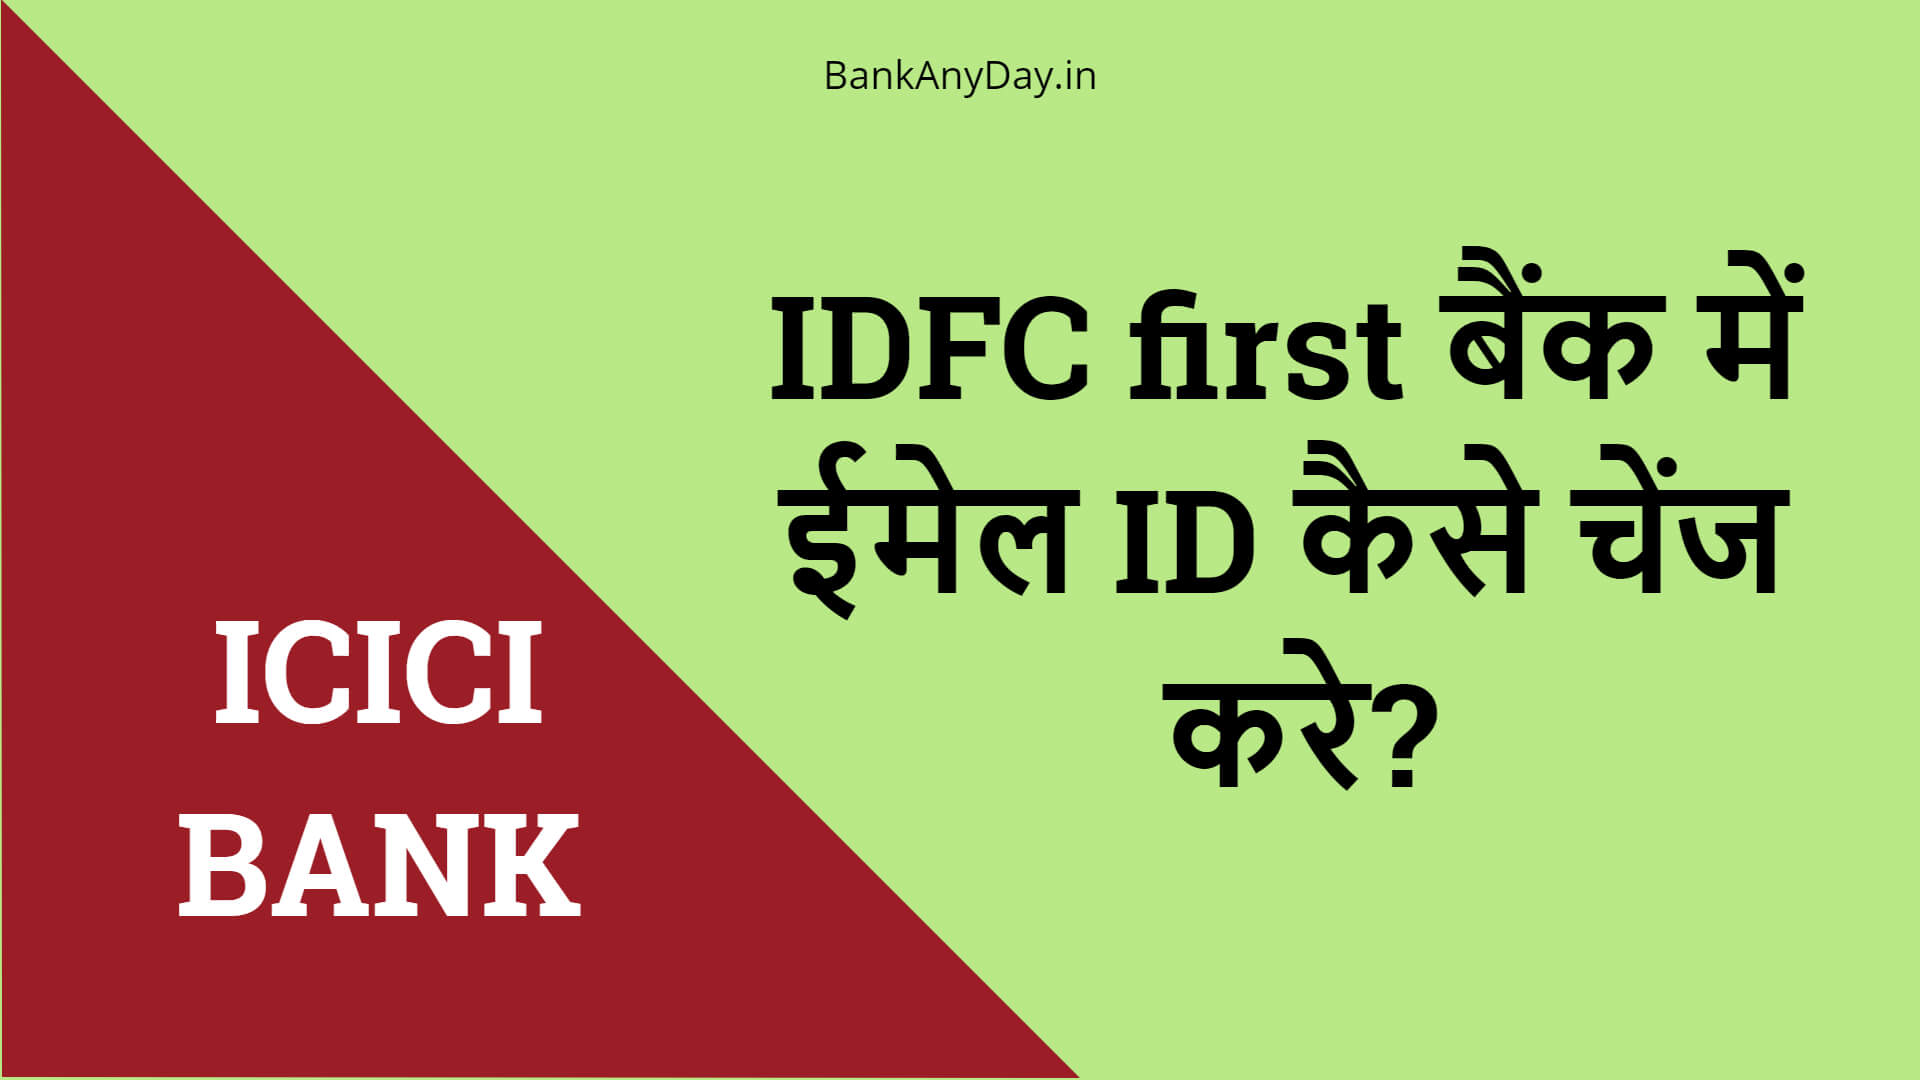 IDFC first bank me email id kaise change kare